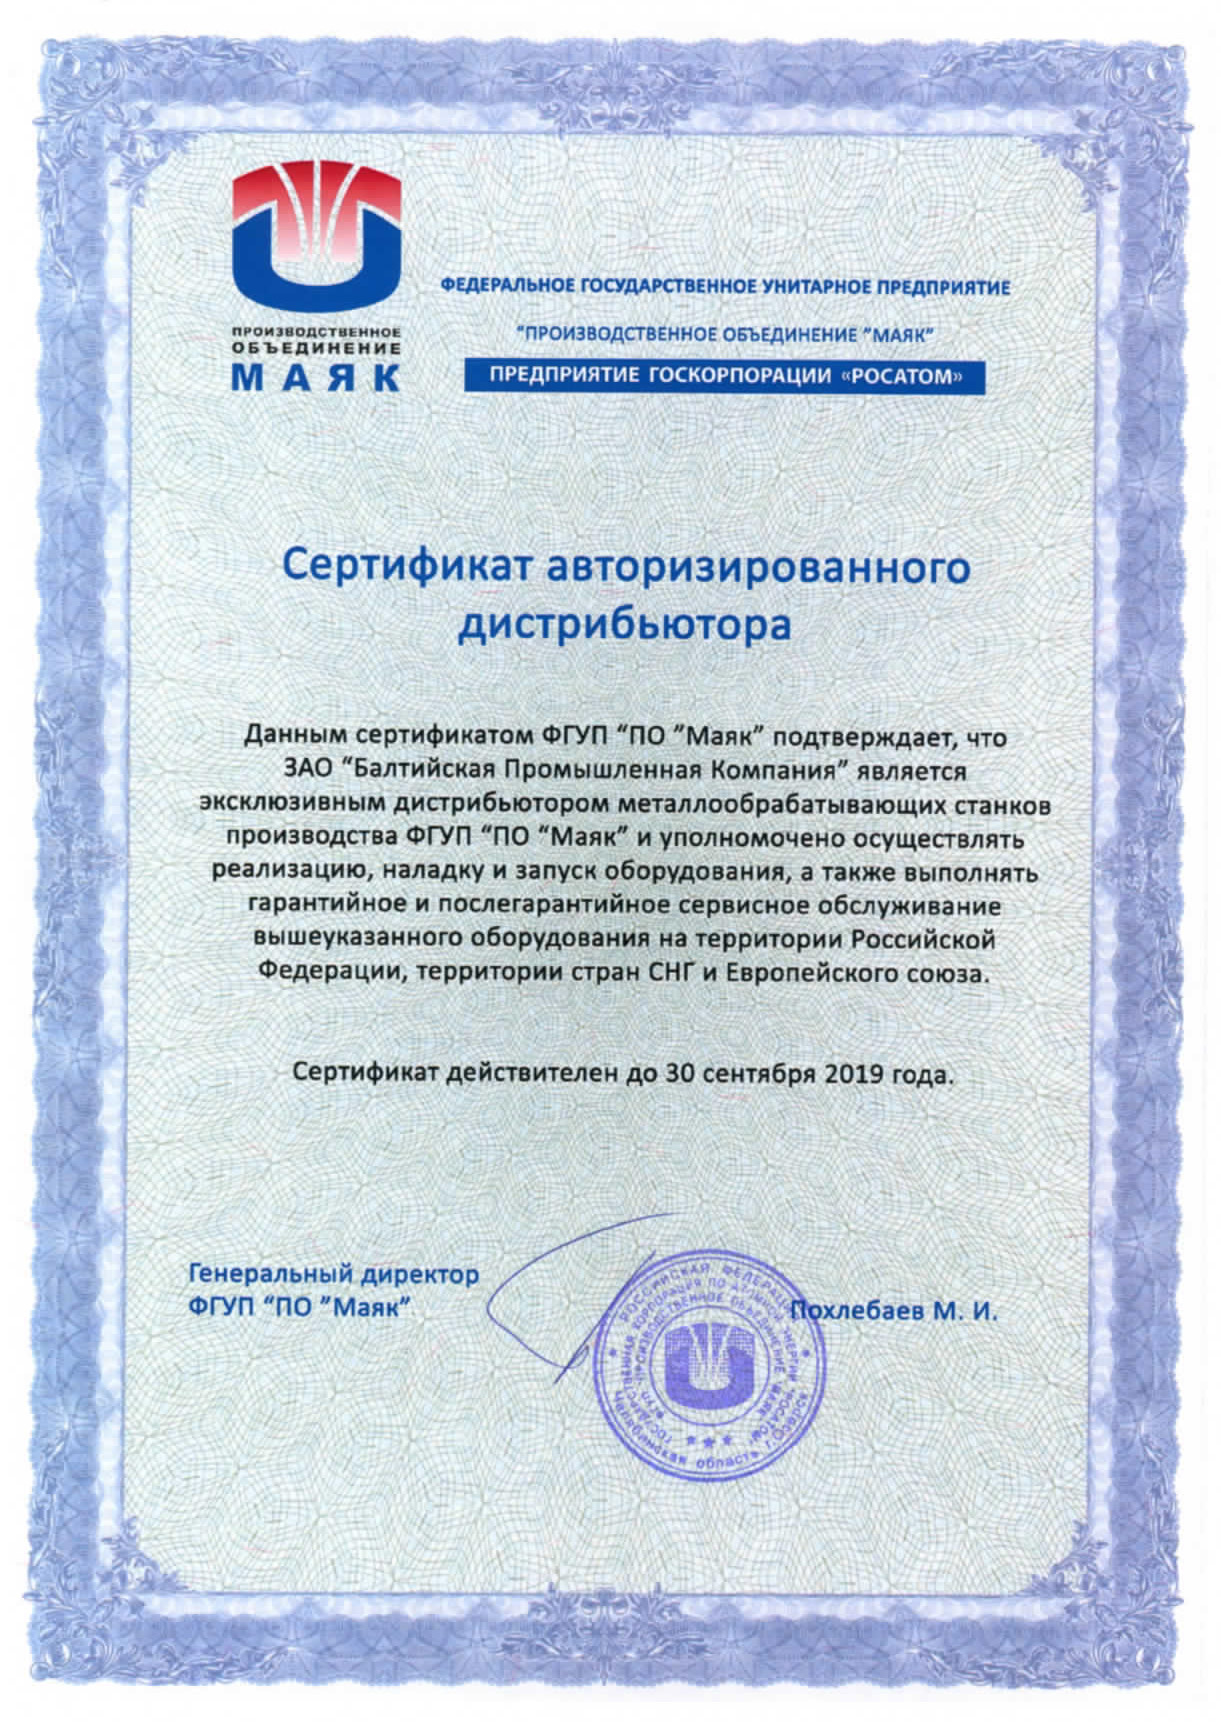 Certificate of authorized distributor FGUP “PO “Mayak”